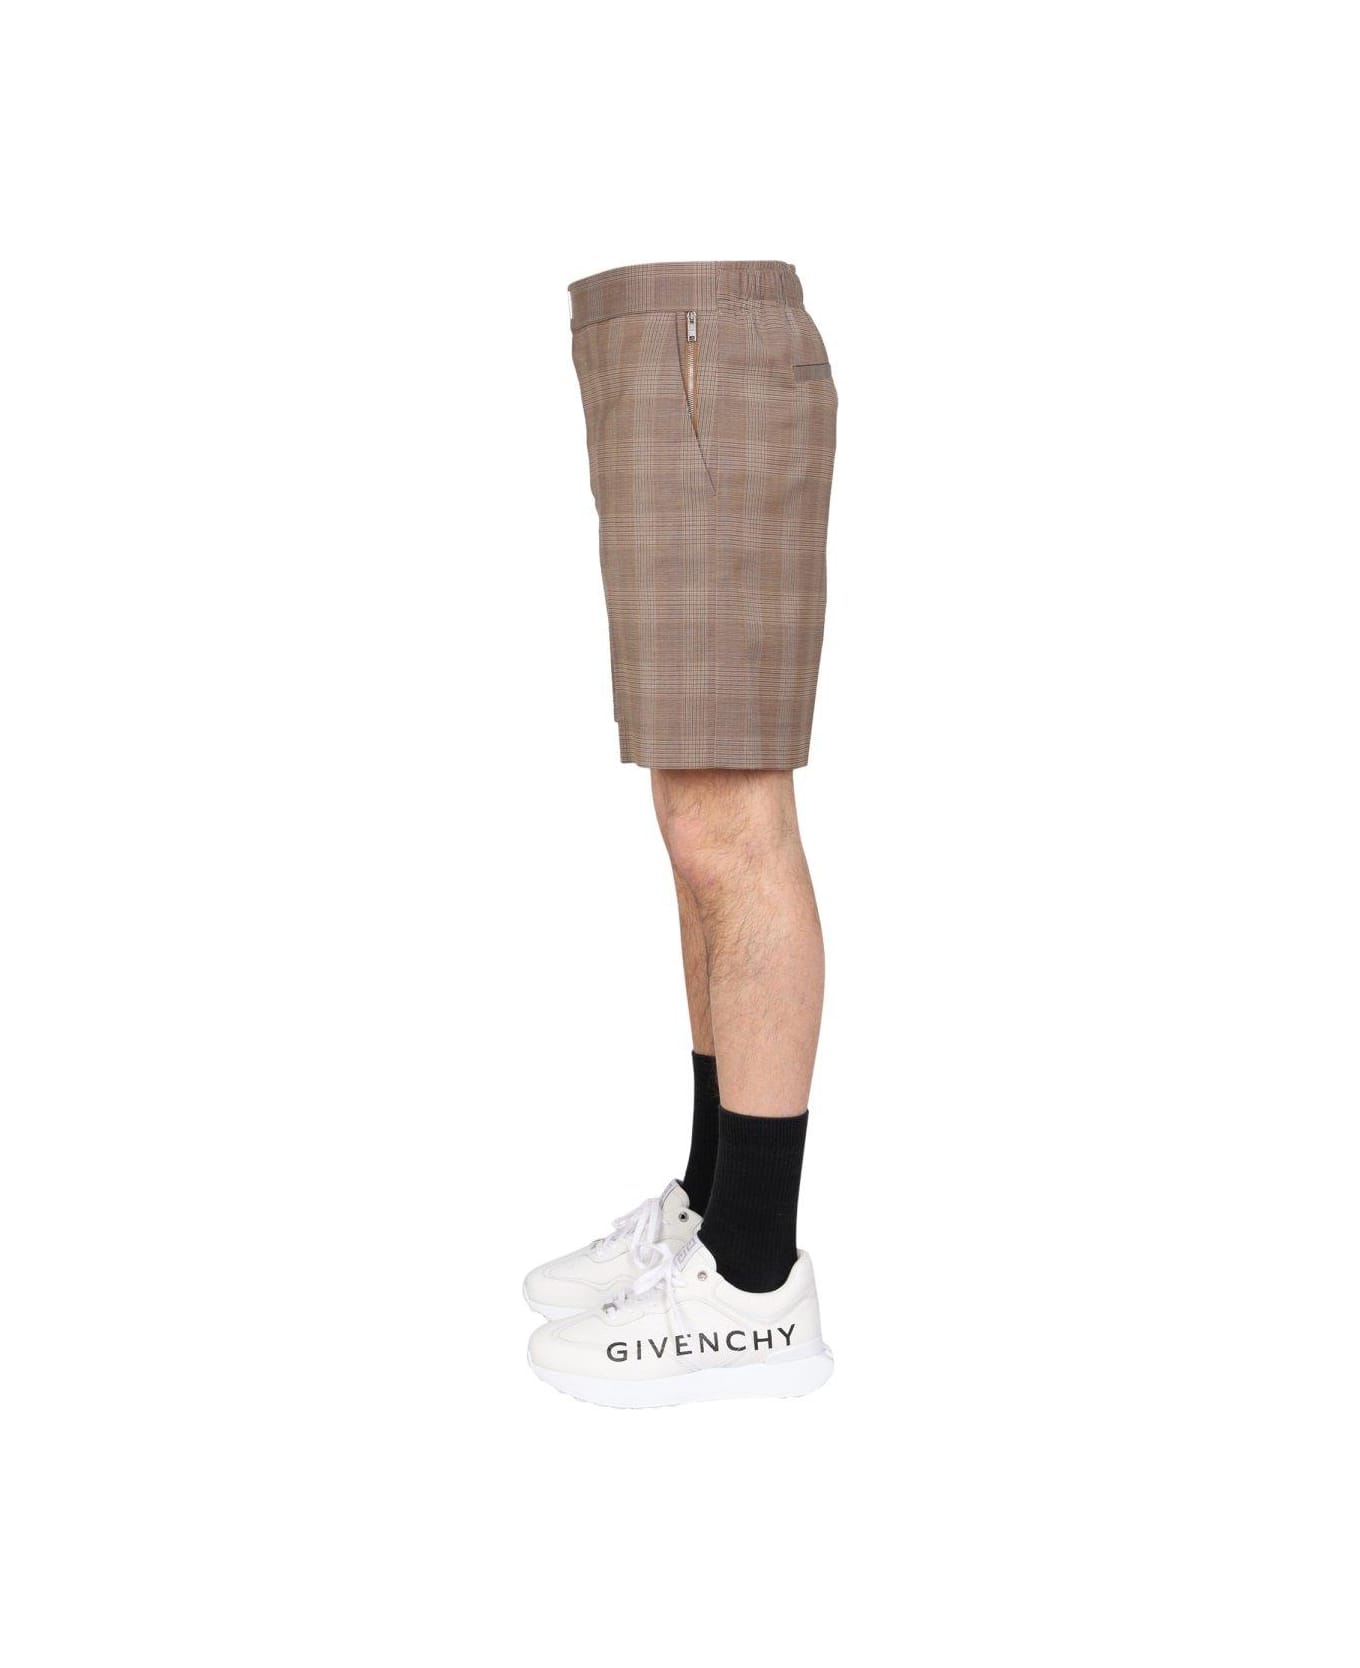 Givenchy Prince Of Wales Pattern Bermuda Shorts - BEIGE ショートパンツ